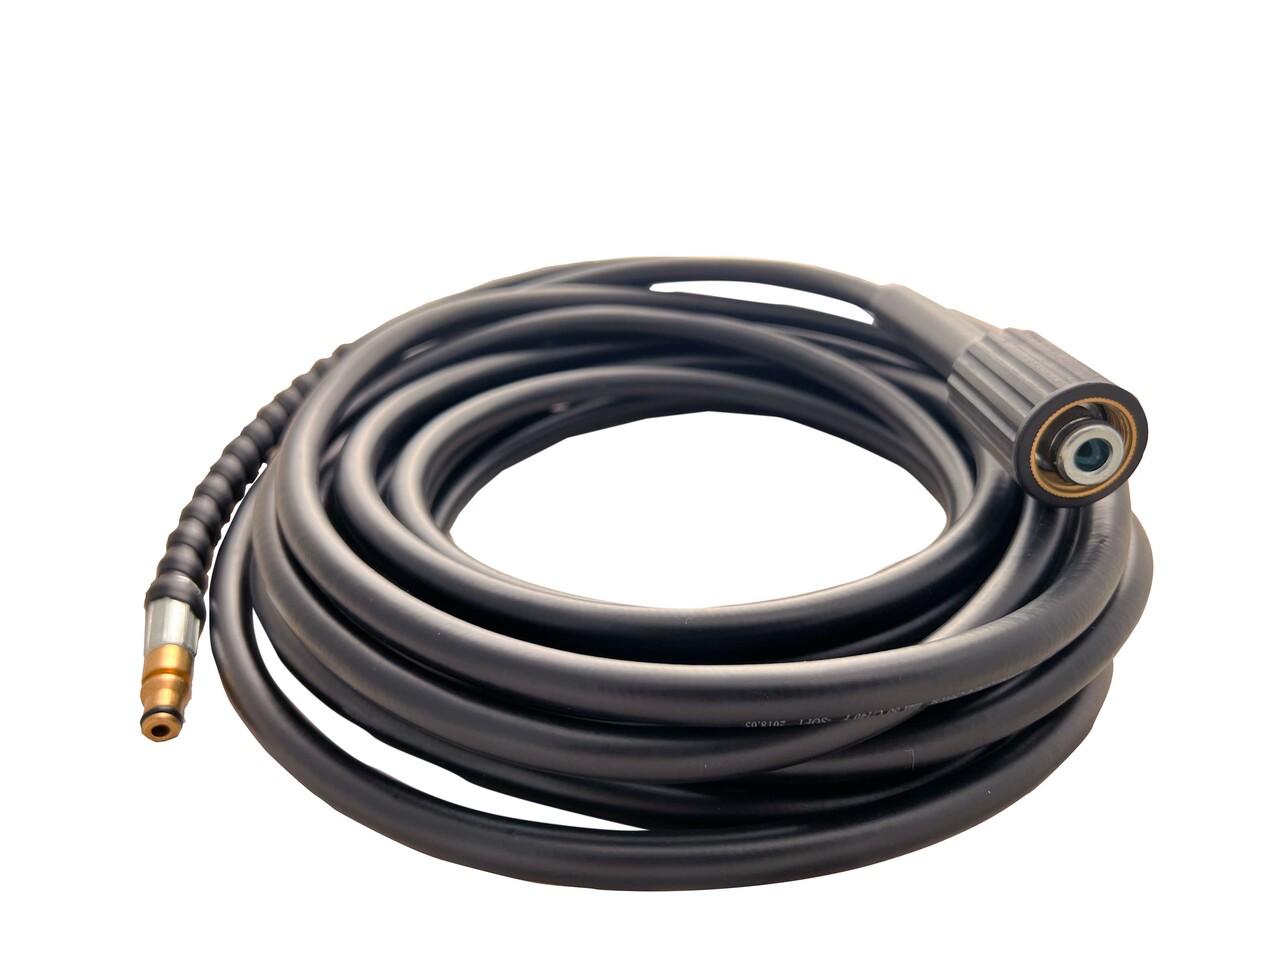 I need a replacement hose for an AR Blue Speedy Wash 1600 PSI Elec. Pressure Washer? Are they still available?